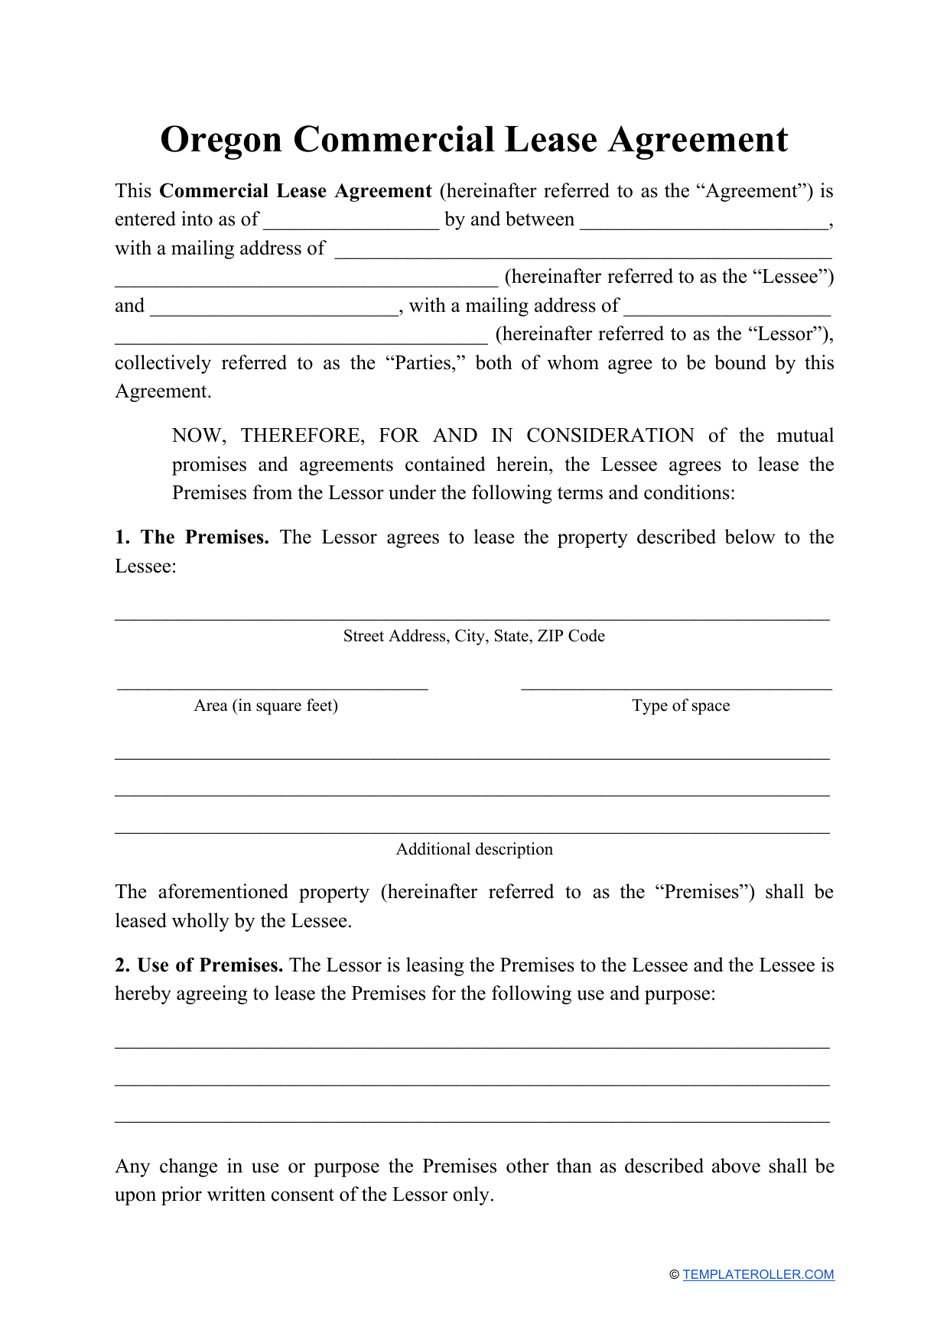 Commercial Lease Agreement Template - Oregon, Page 1